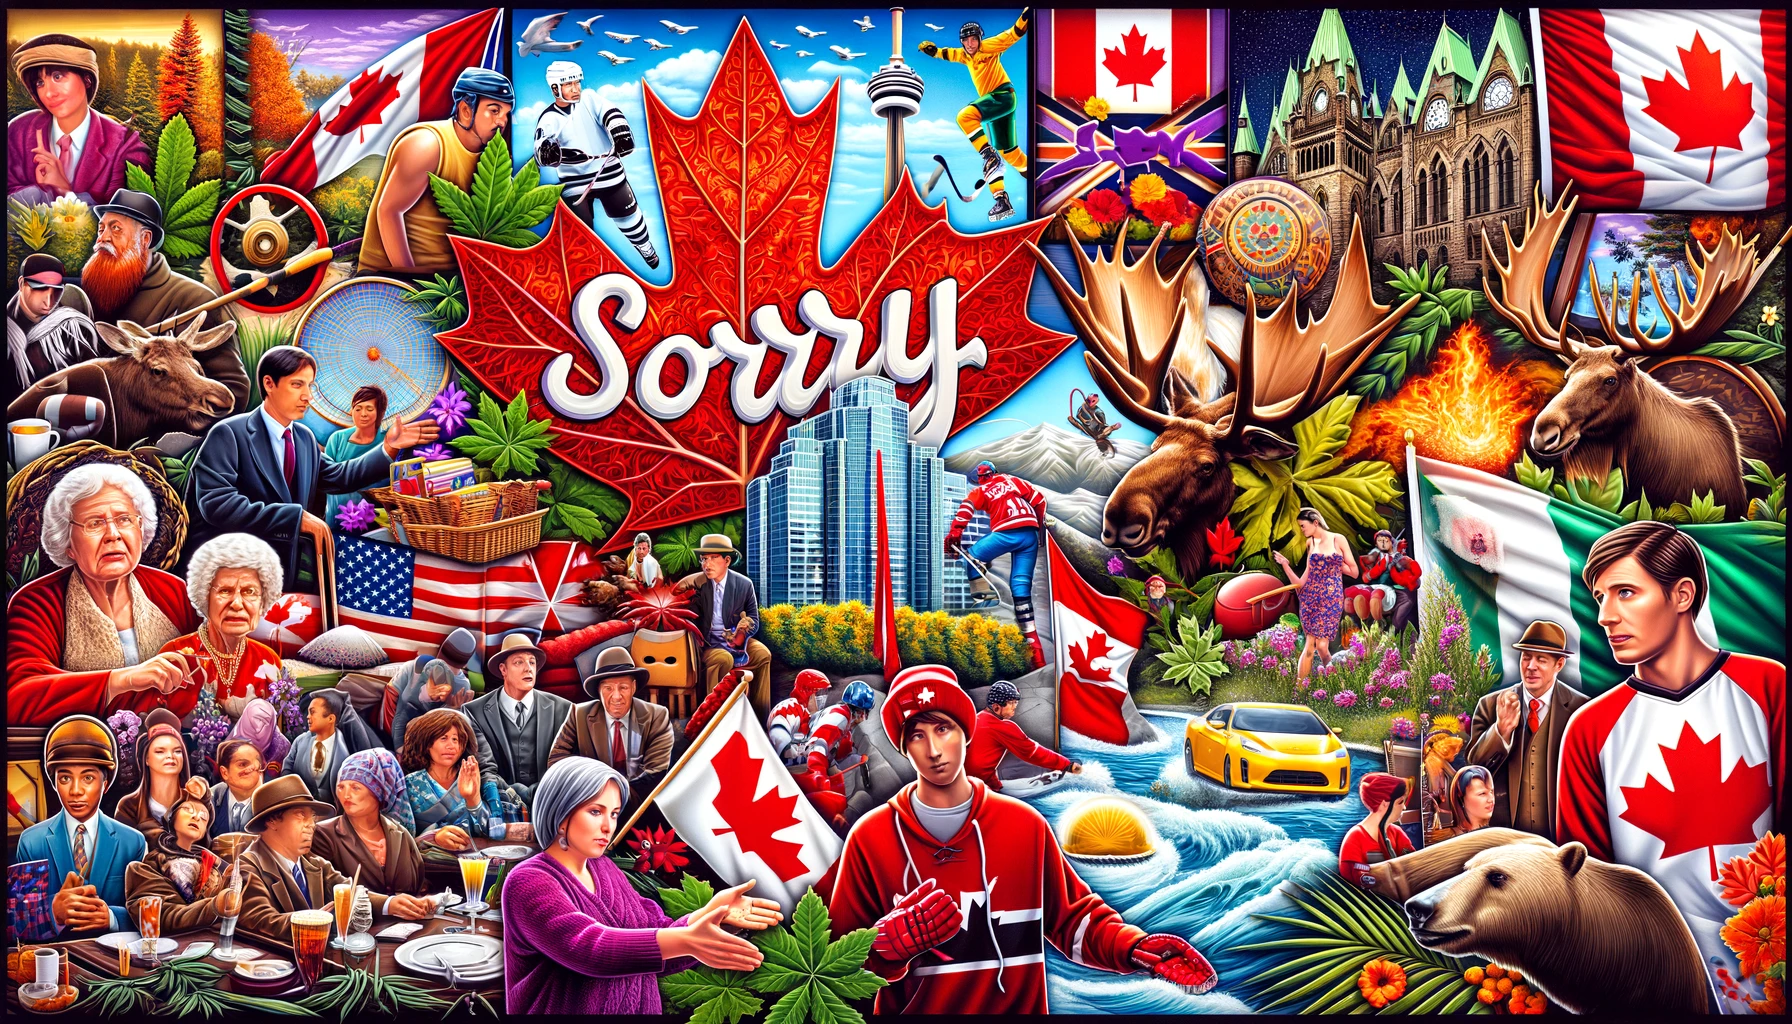 The Art of Apologizing: A Canadian Tradition